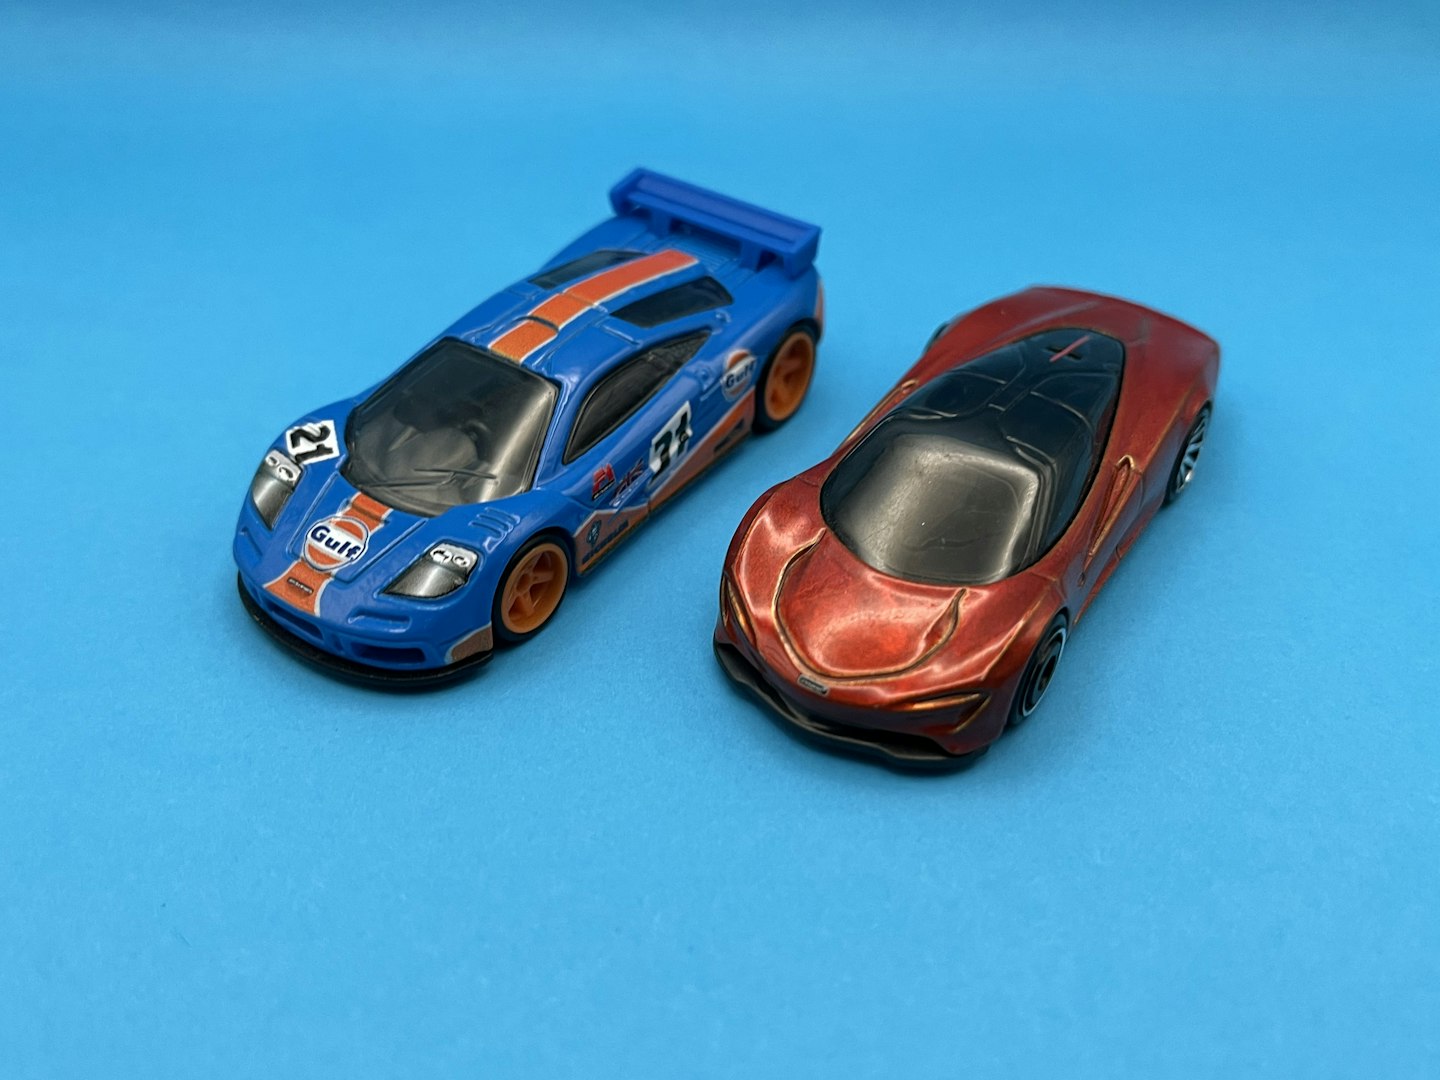 The two Hot Wheels McLarens